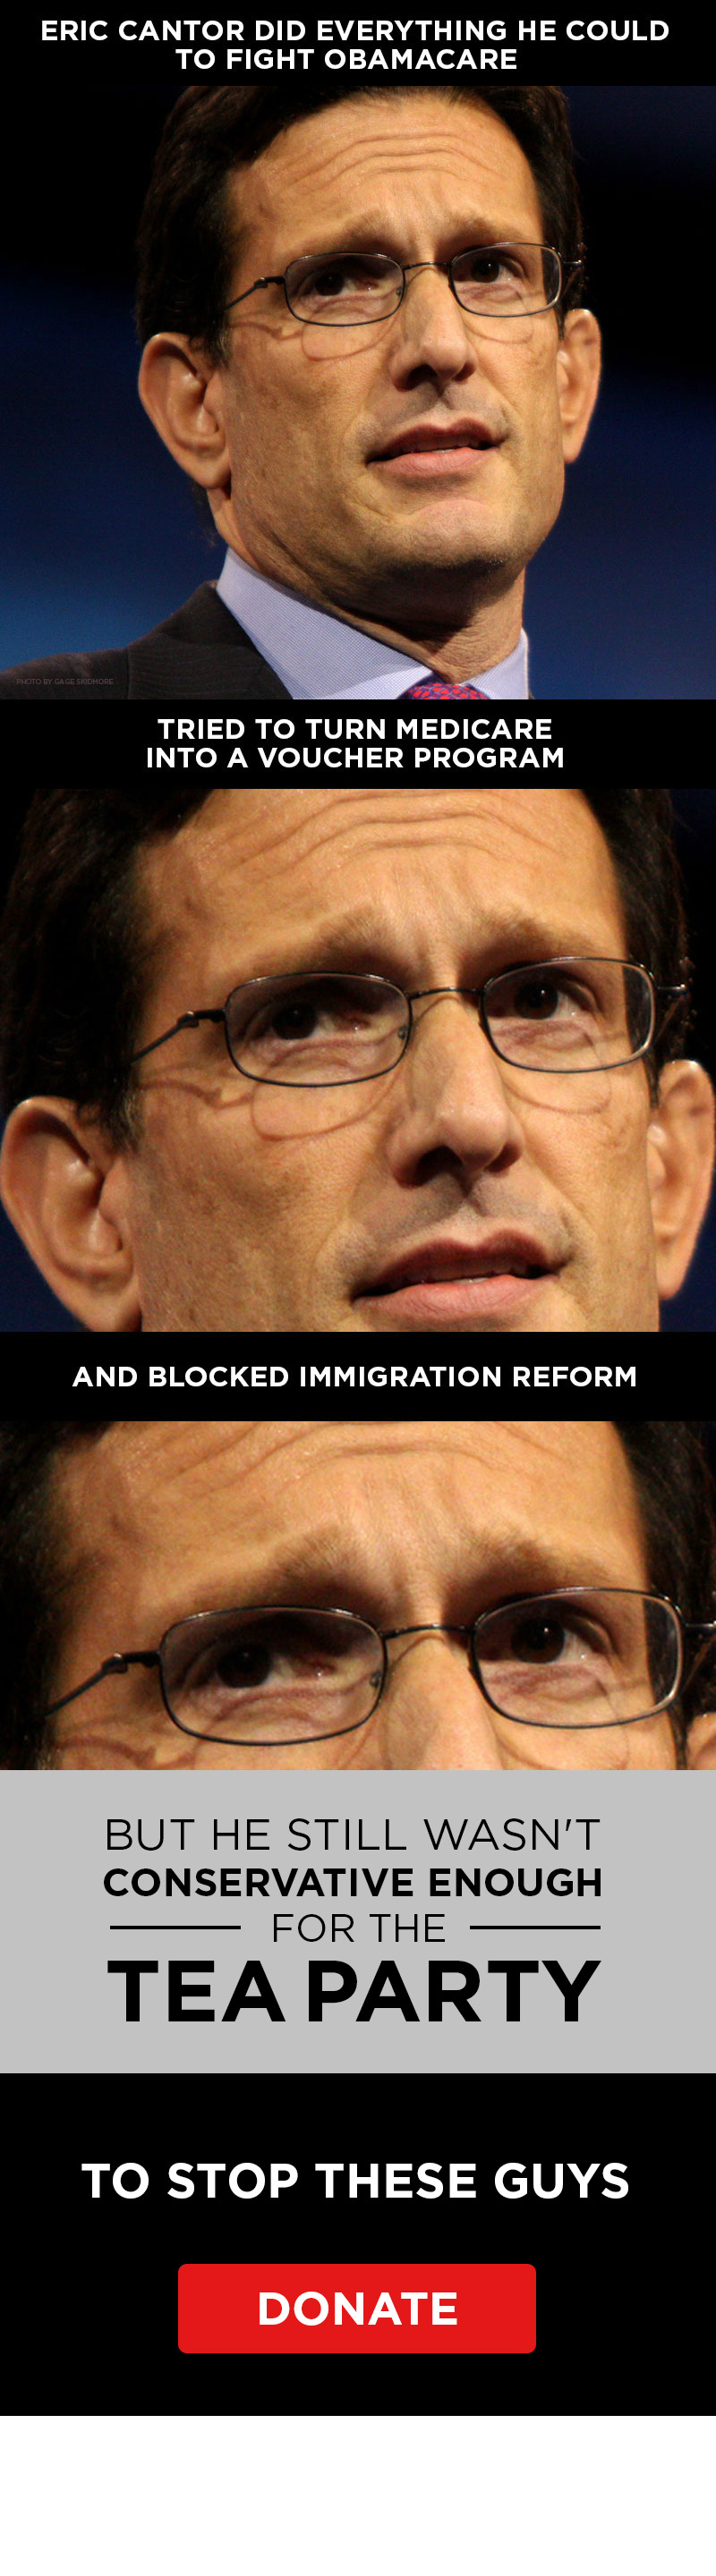 DNC fundraising email sent after Eric Cantor's primary defeat